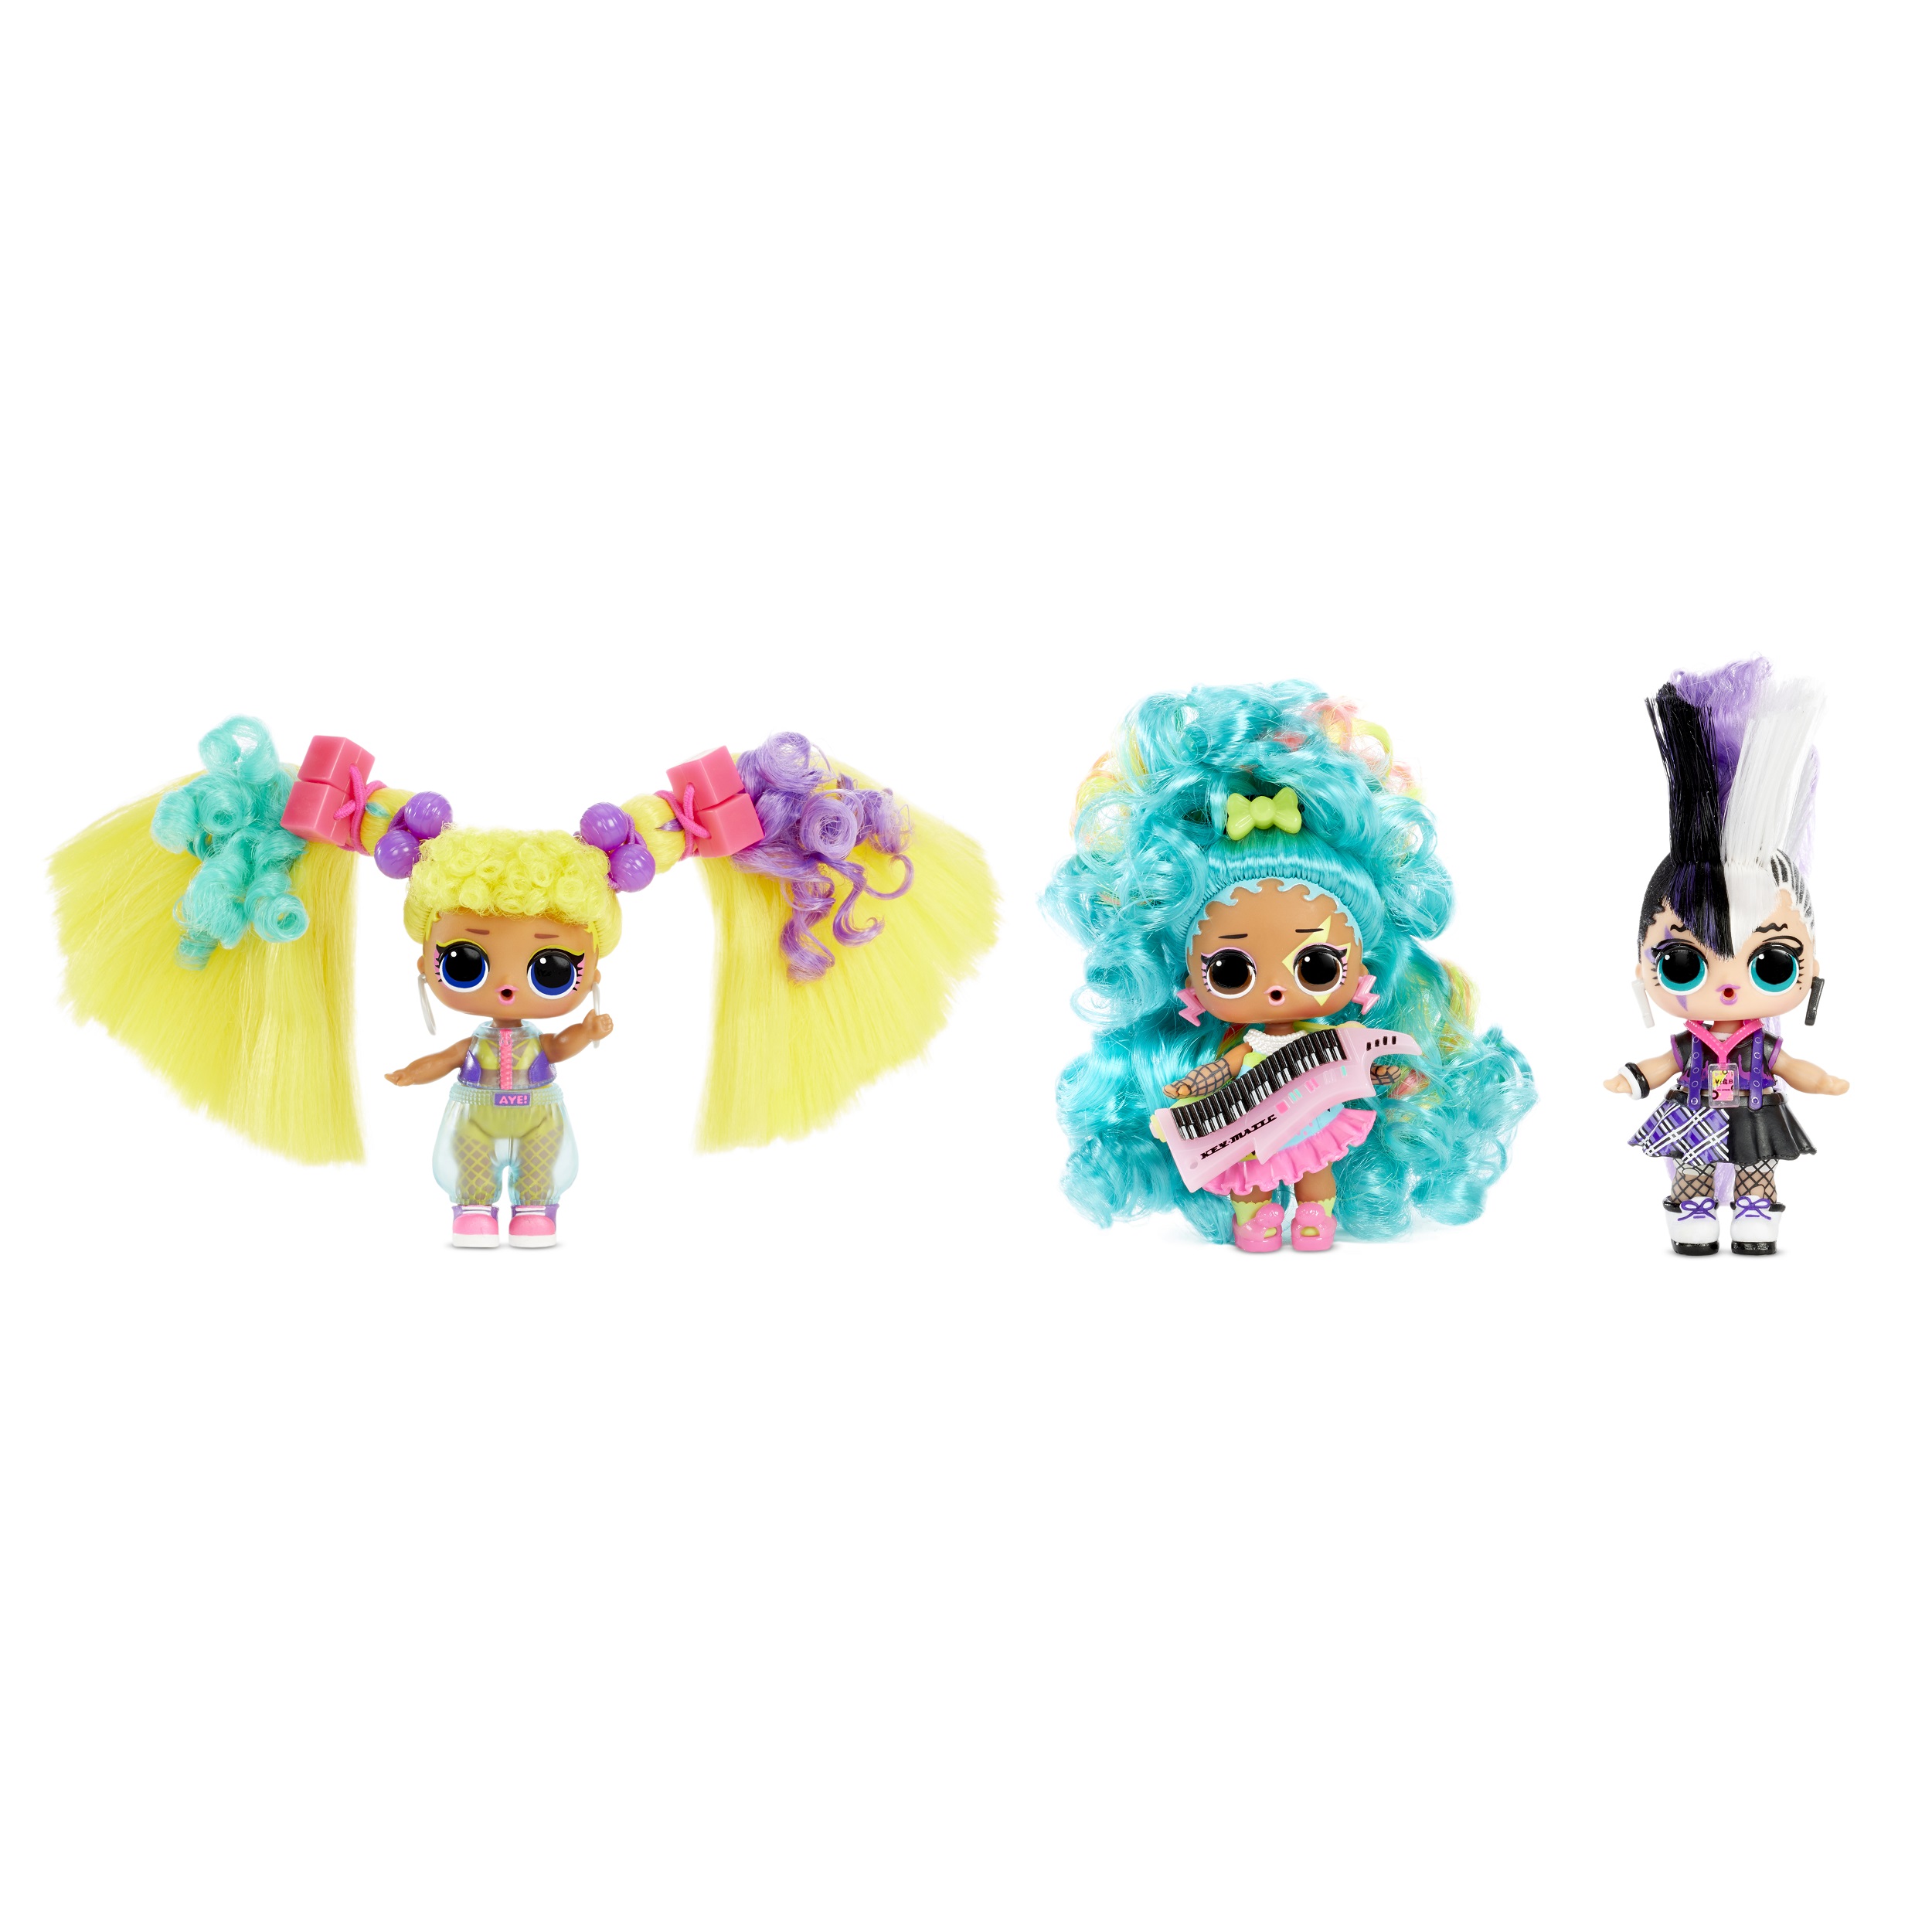 Mga · L.O.L. Surprise - Pets Asst Real Hair and Surprise Song Lyrics (Toys)